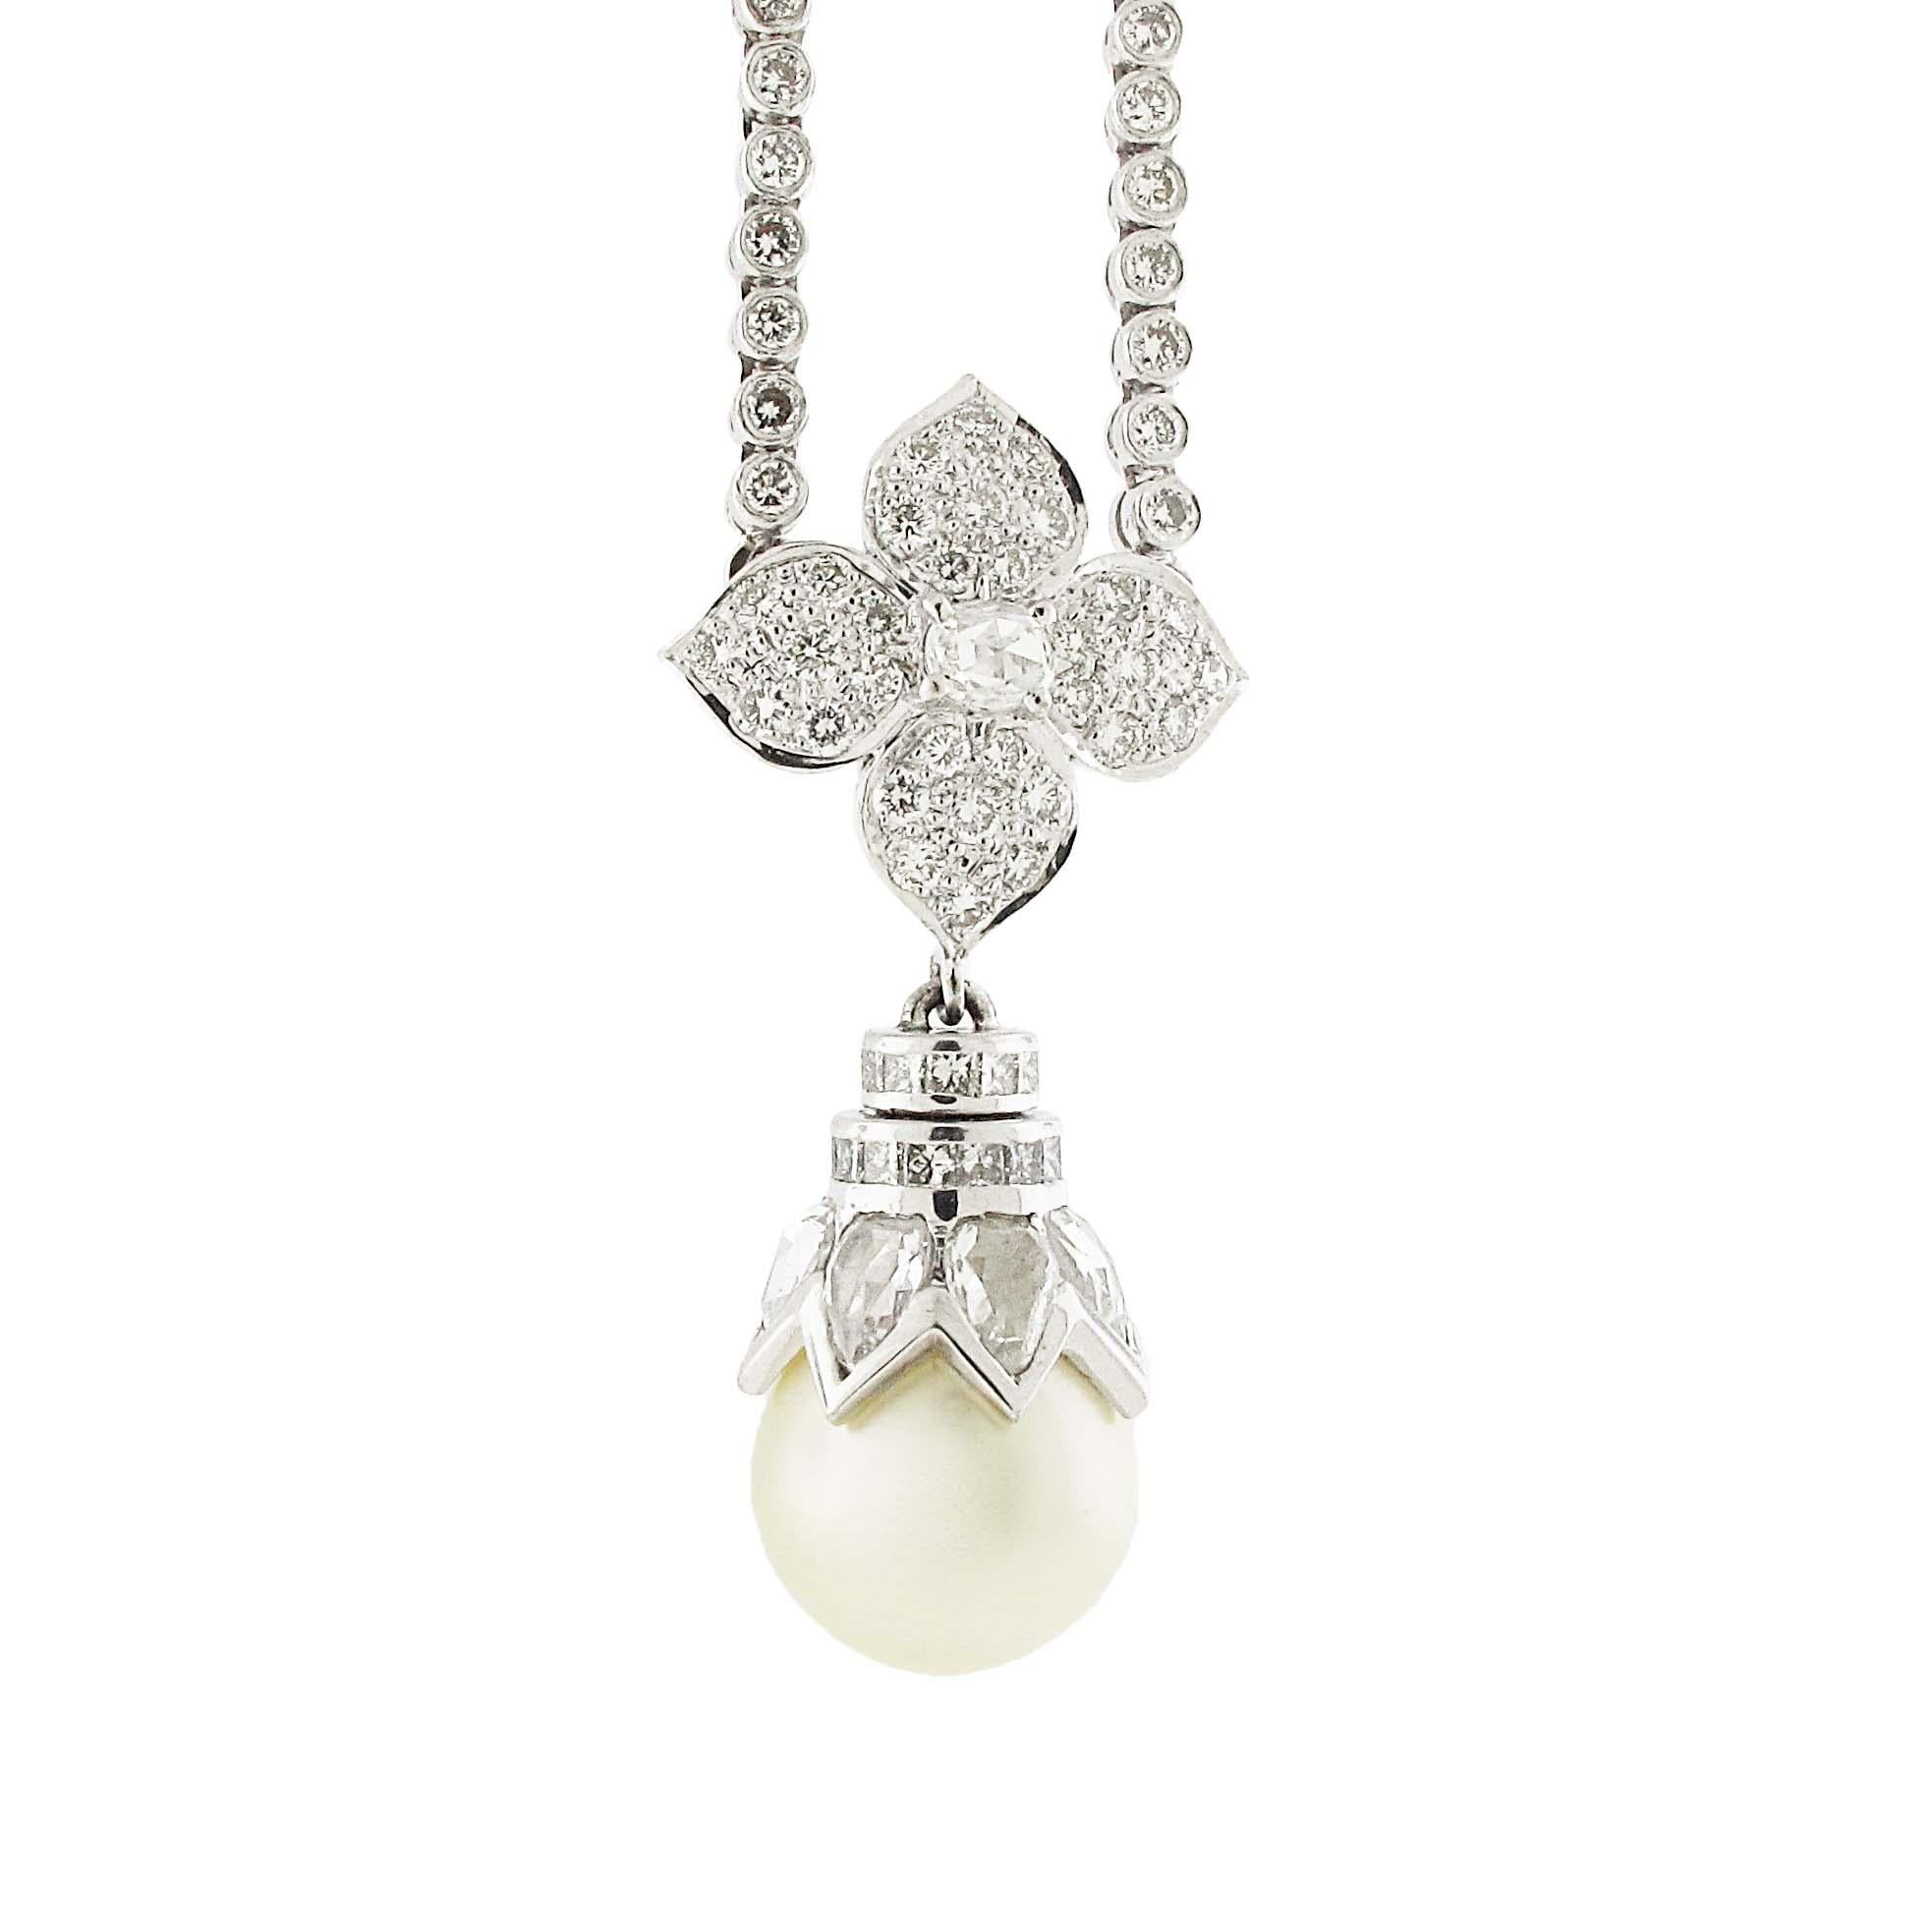 A truly elegant diamond and pearl pendant necklace. The center pearl is of extremely high quality and displays a high luster. The diamond topper is connected at the 10 and 2 position meaning it will sit perfectly on the neck. The chain also has